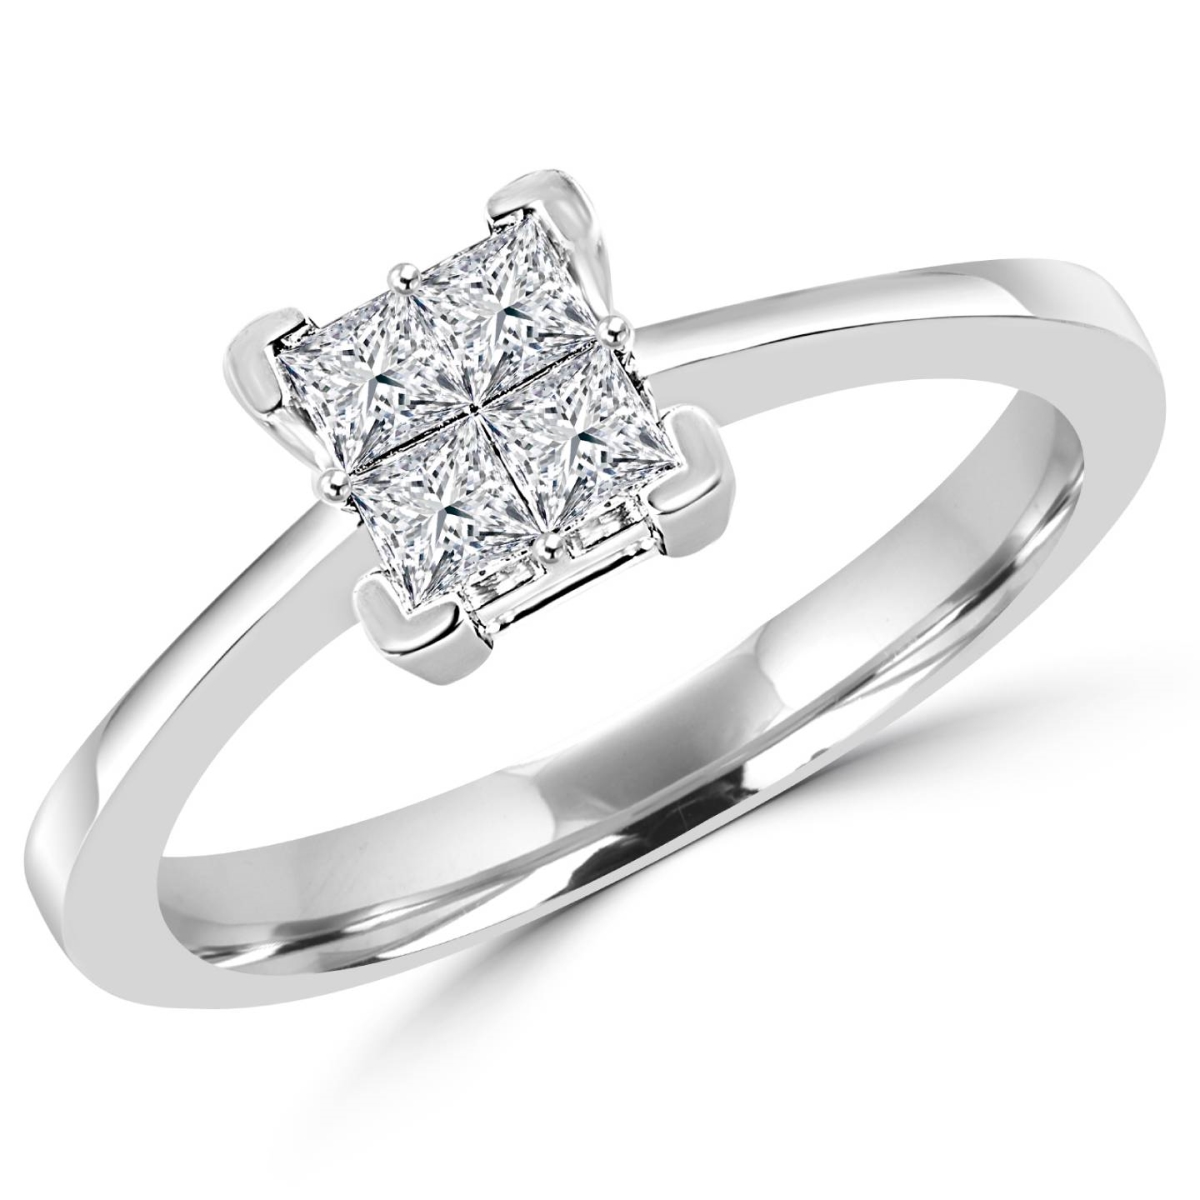 Picture of Majesty Diamonds MDR140108 0.37 CTW Invisible-Set Princess Cut Diamond Engagement Promise Ring in 14K